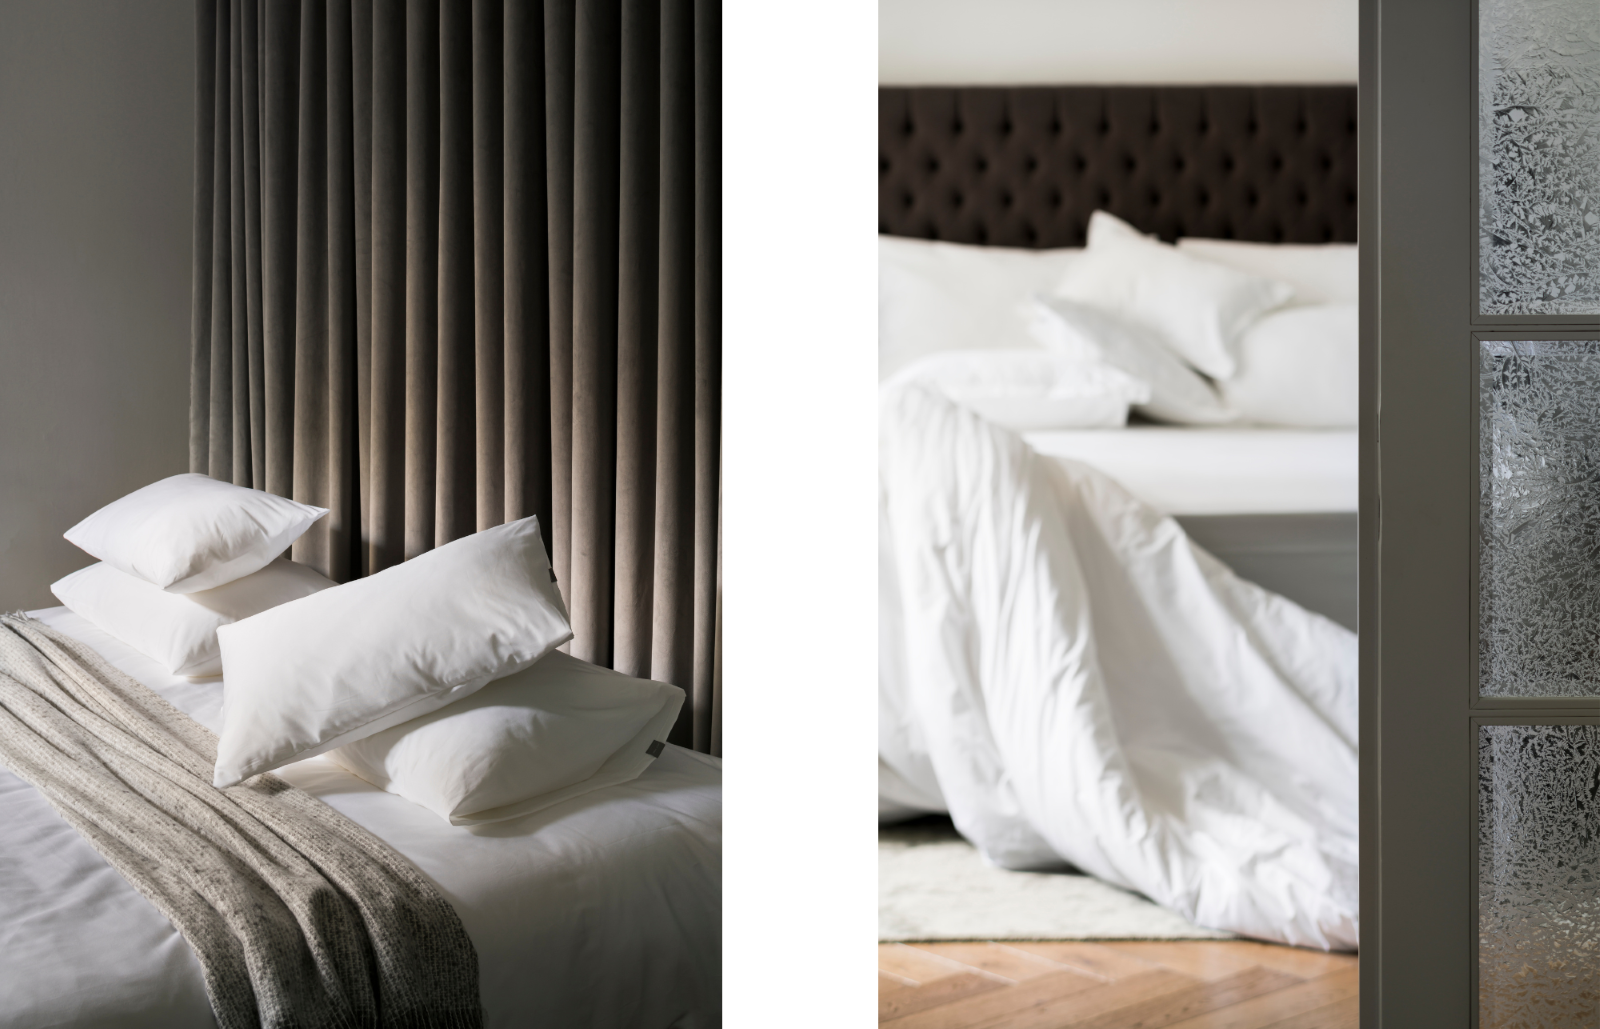 If you’re aiming for a unified clean look, choose white bedsheets.